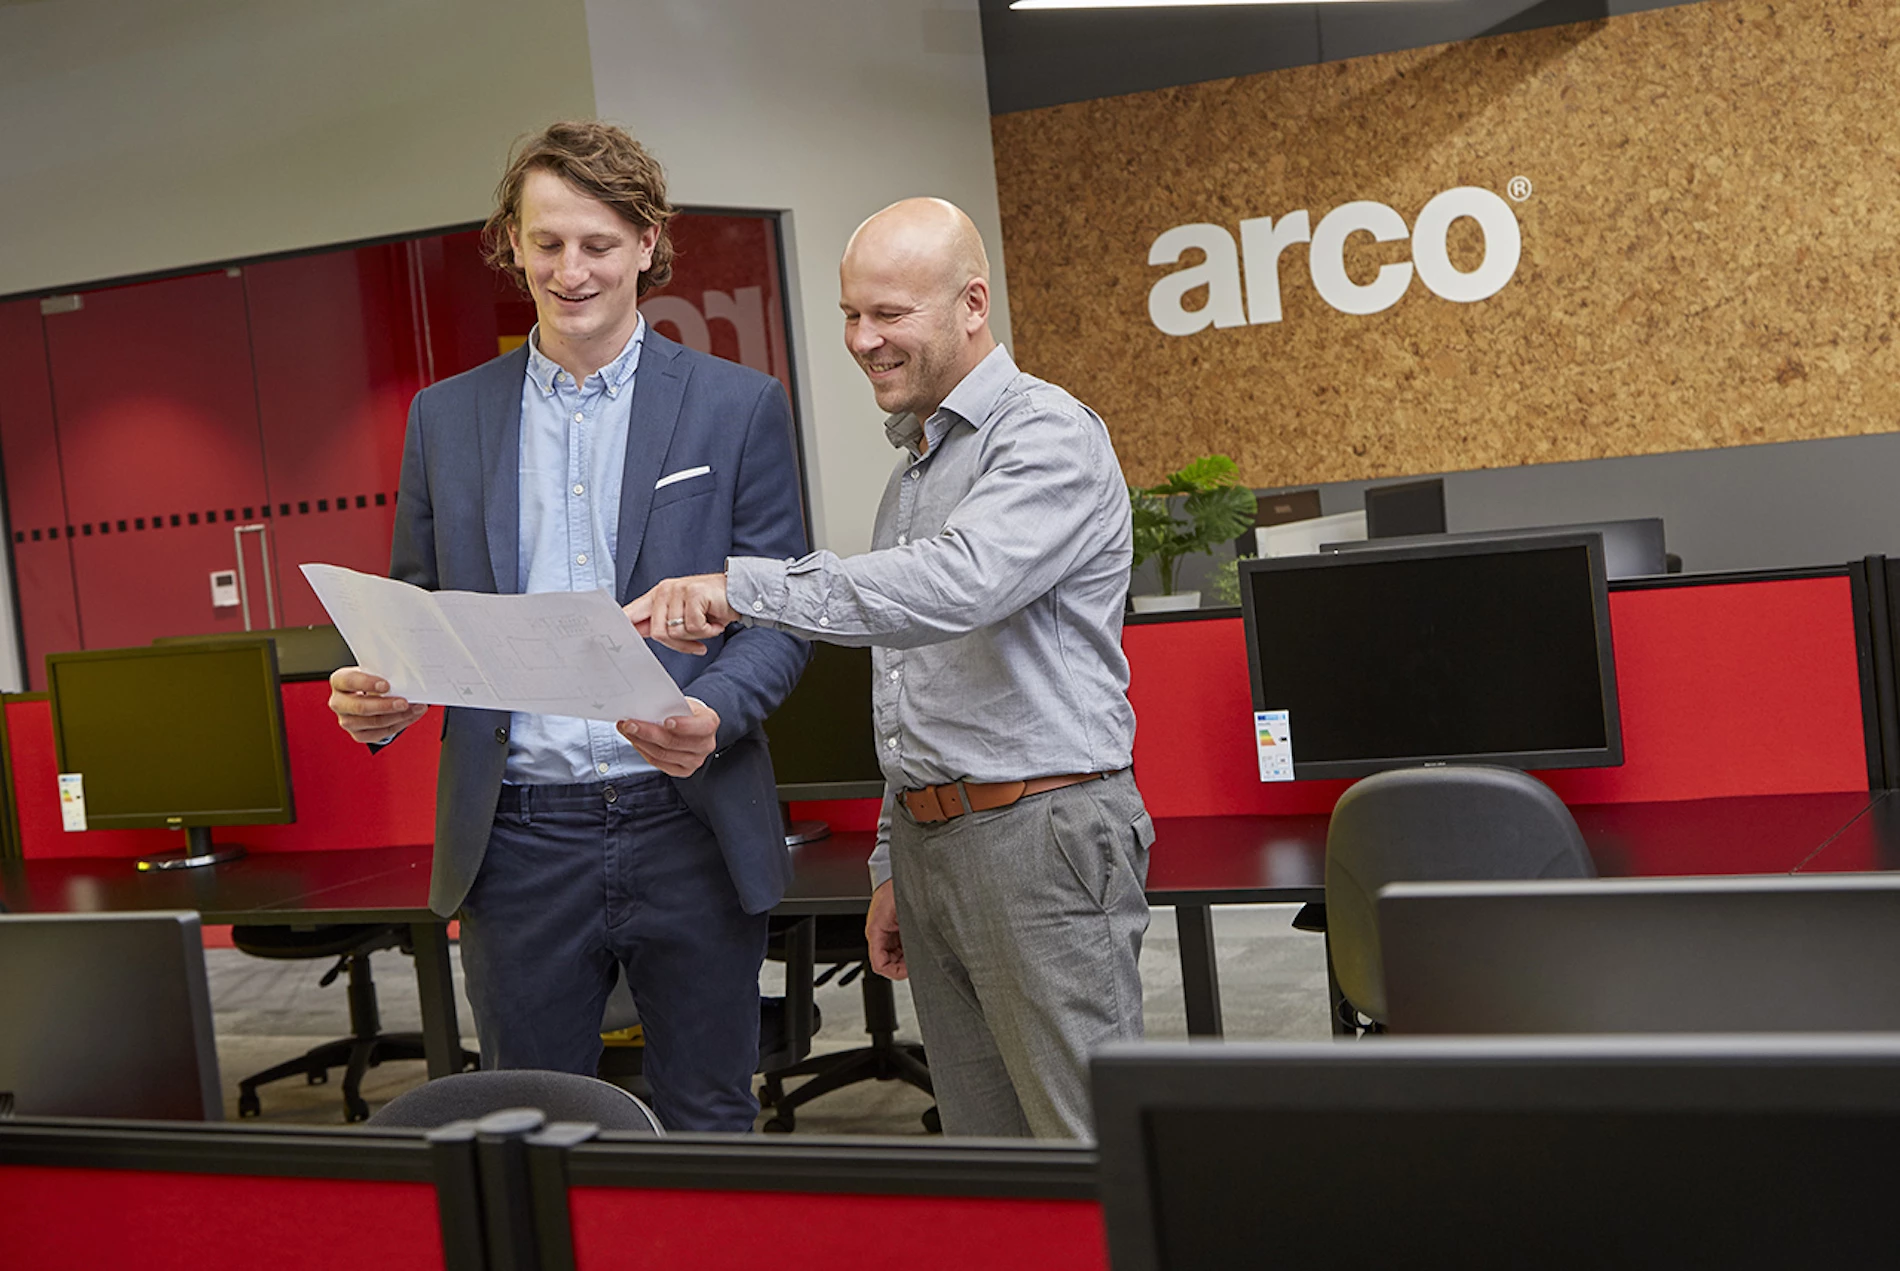 Charlie Allenby of Allenby Commercial (left) and Justine Iveson of Arco at the new customer engagement centre.